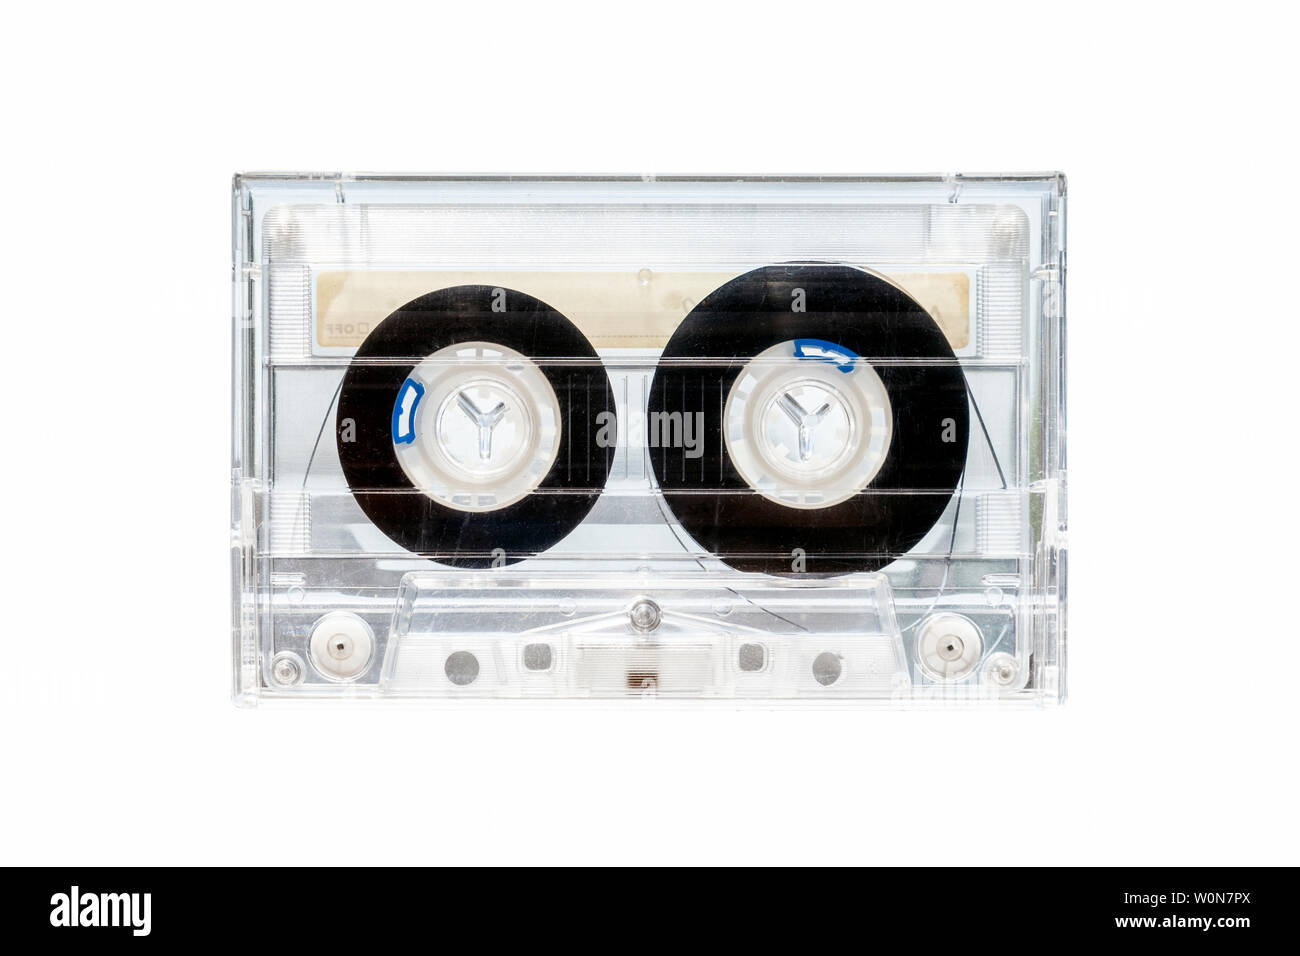 Transparent plastic C90 compact cassette audio tape in its case isolated against a white background Stock Photo